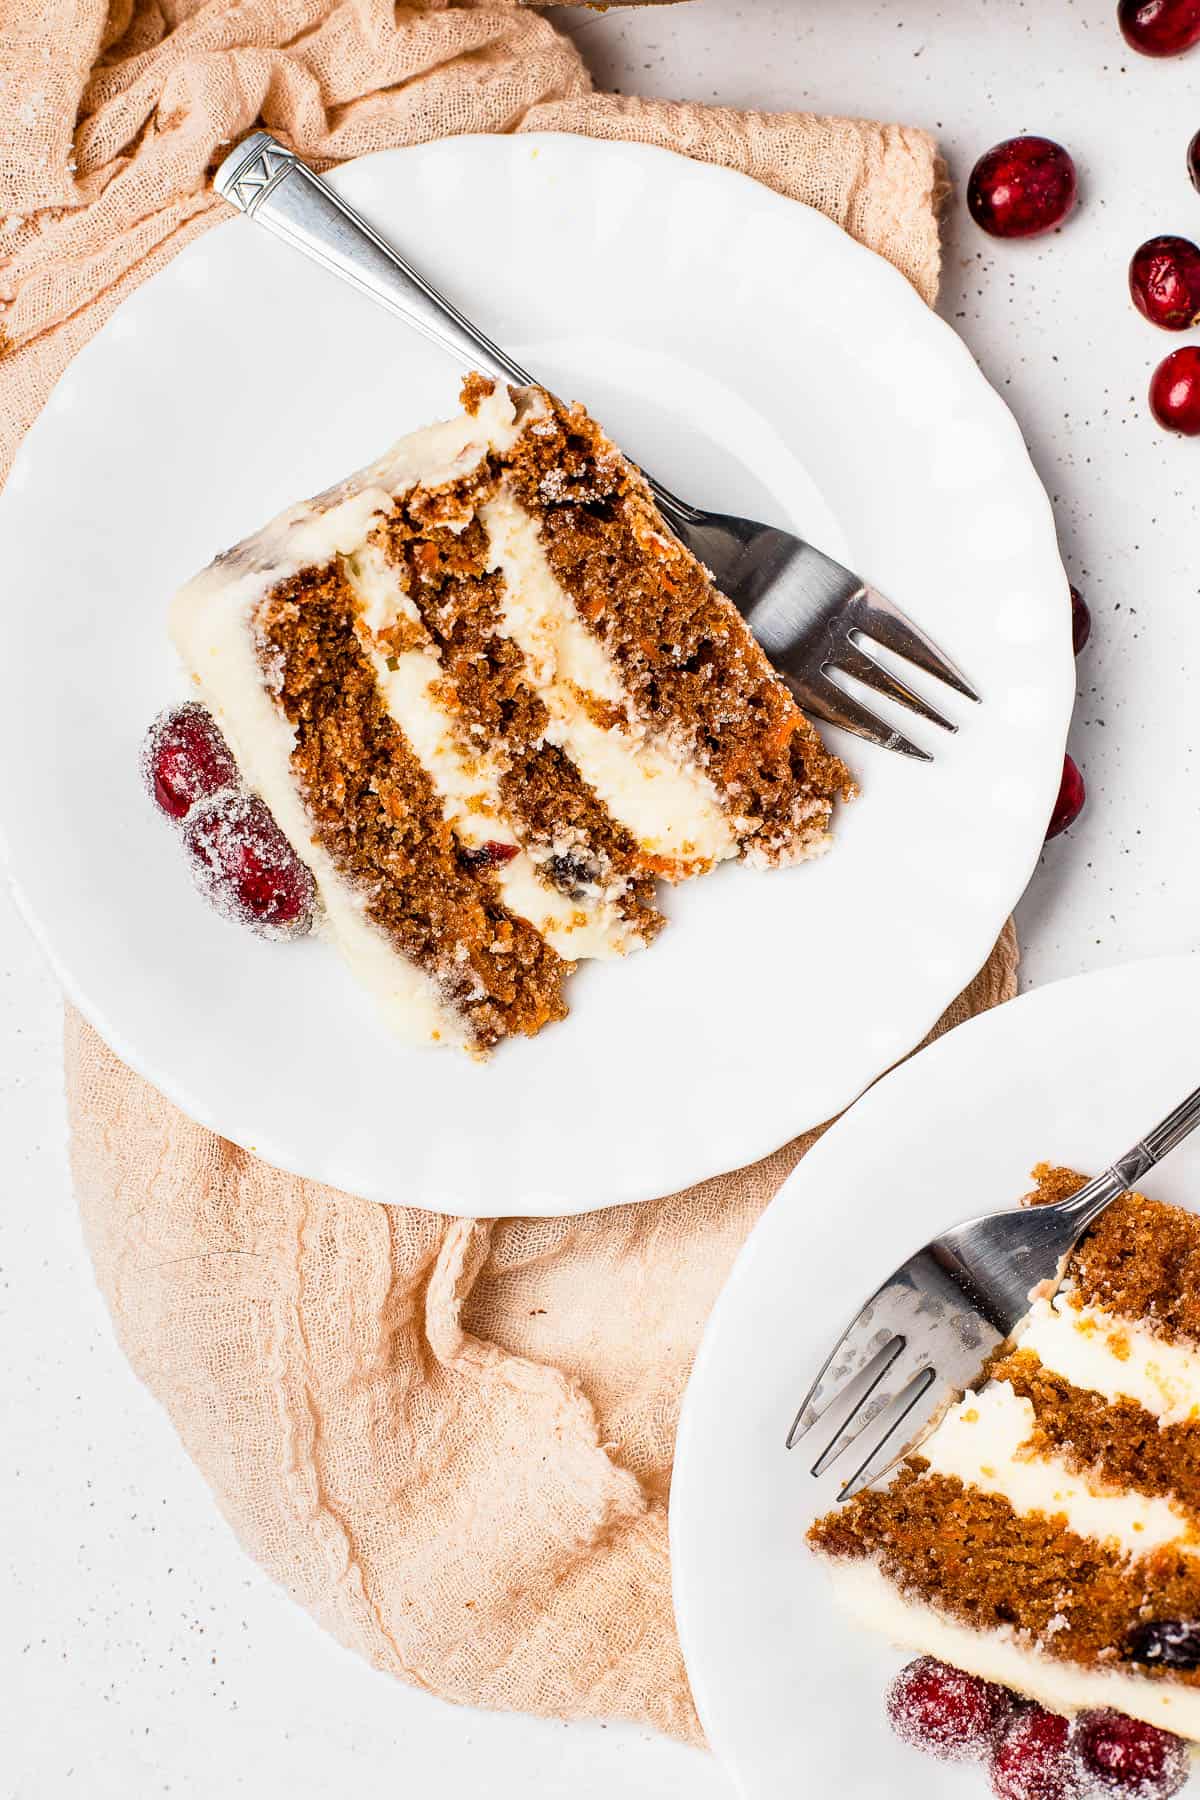 A close-up shot of a slice of cranberry carrot layer cake on a dessert plate with a fork.